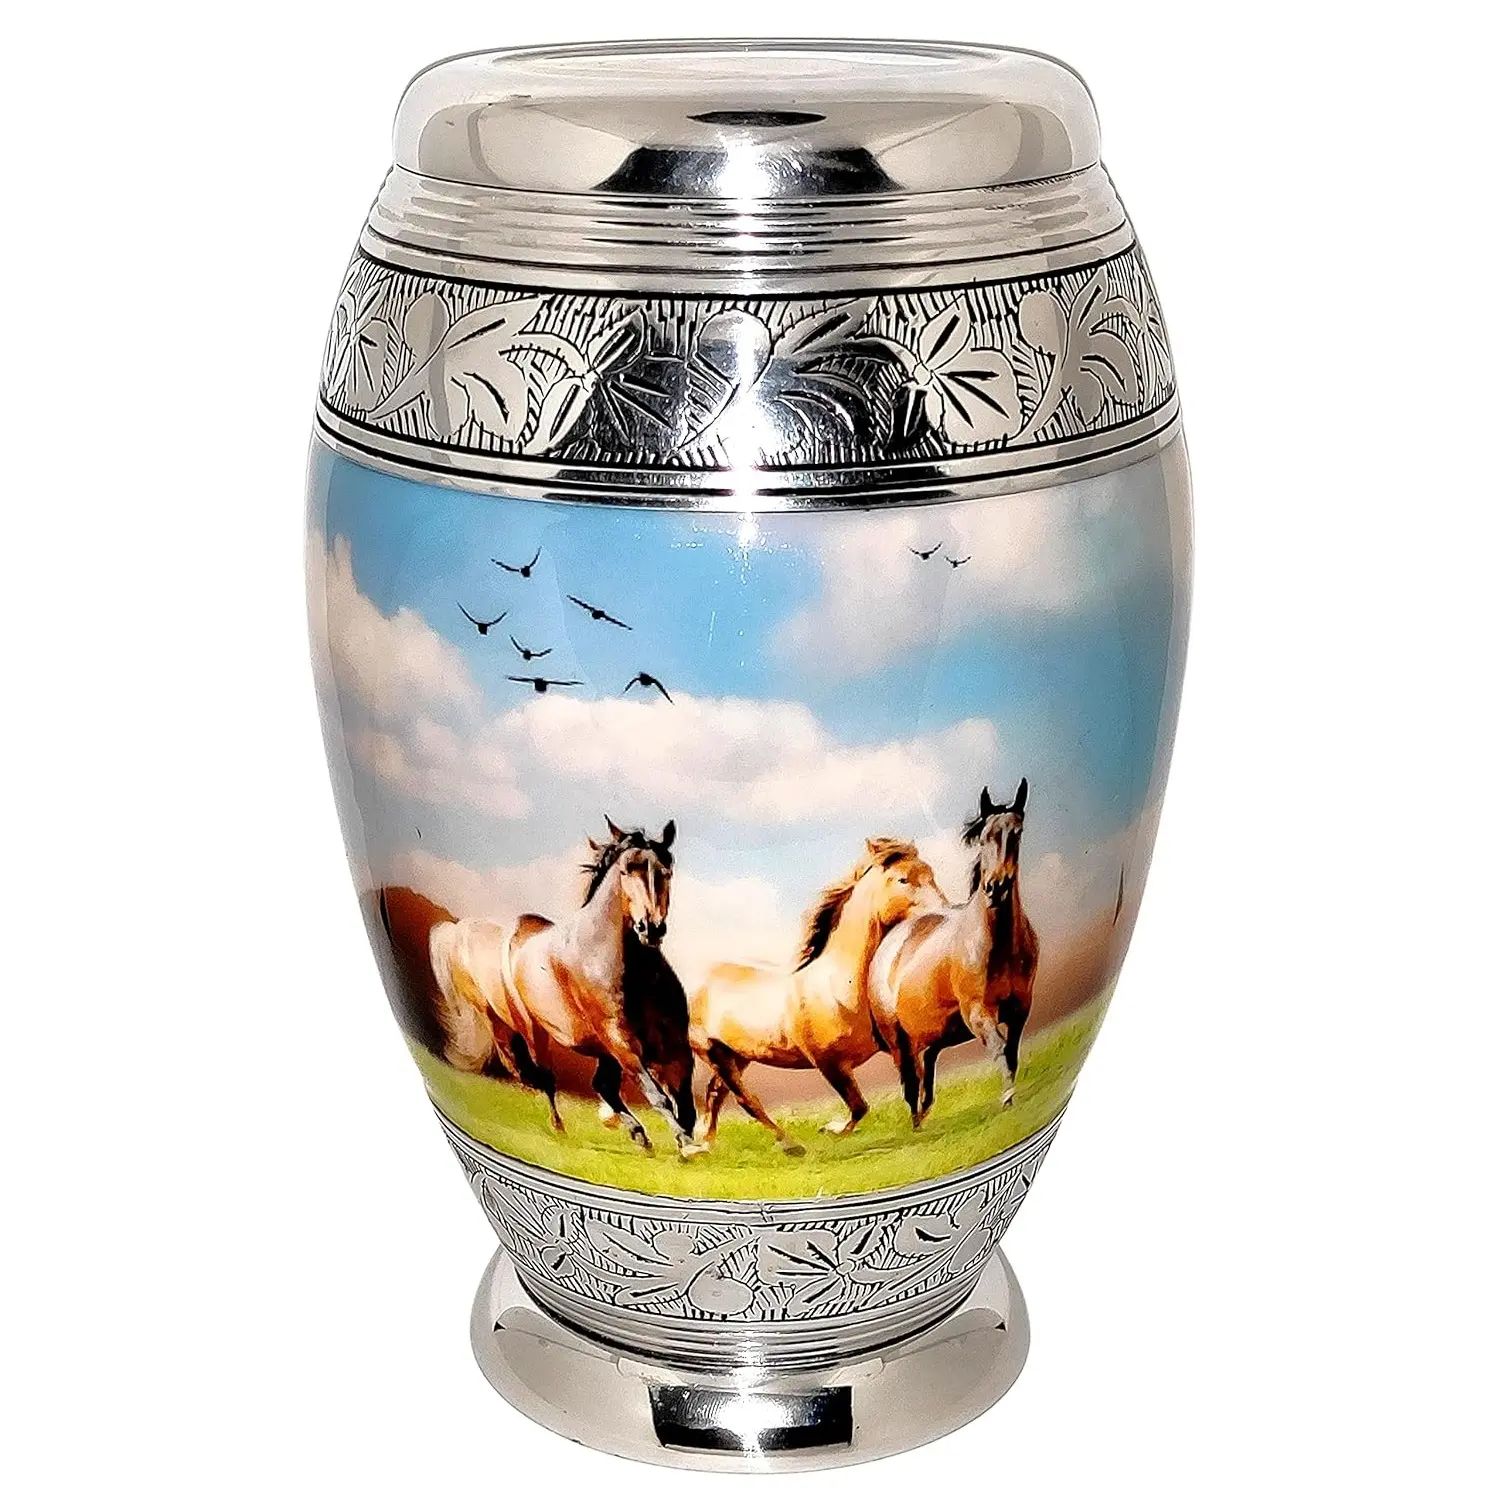 Best Selling Cremation Urn for Adult Funeral Memorial Ashes Container - With Lovely Horse Art Work